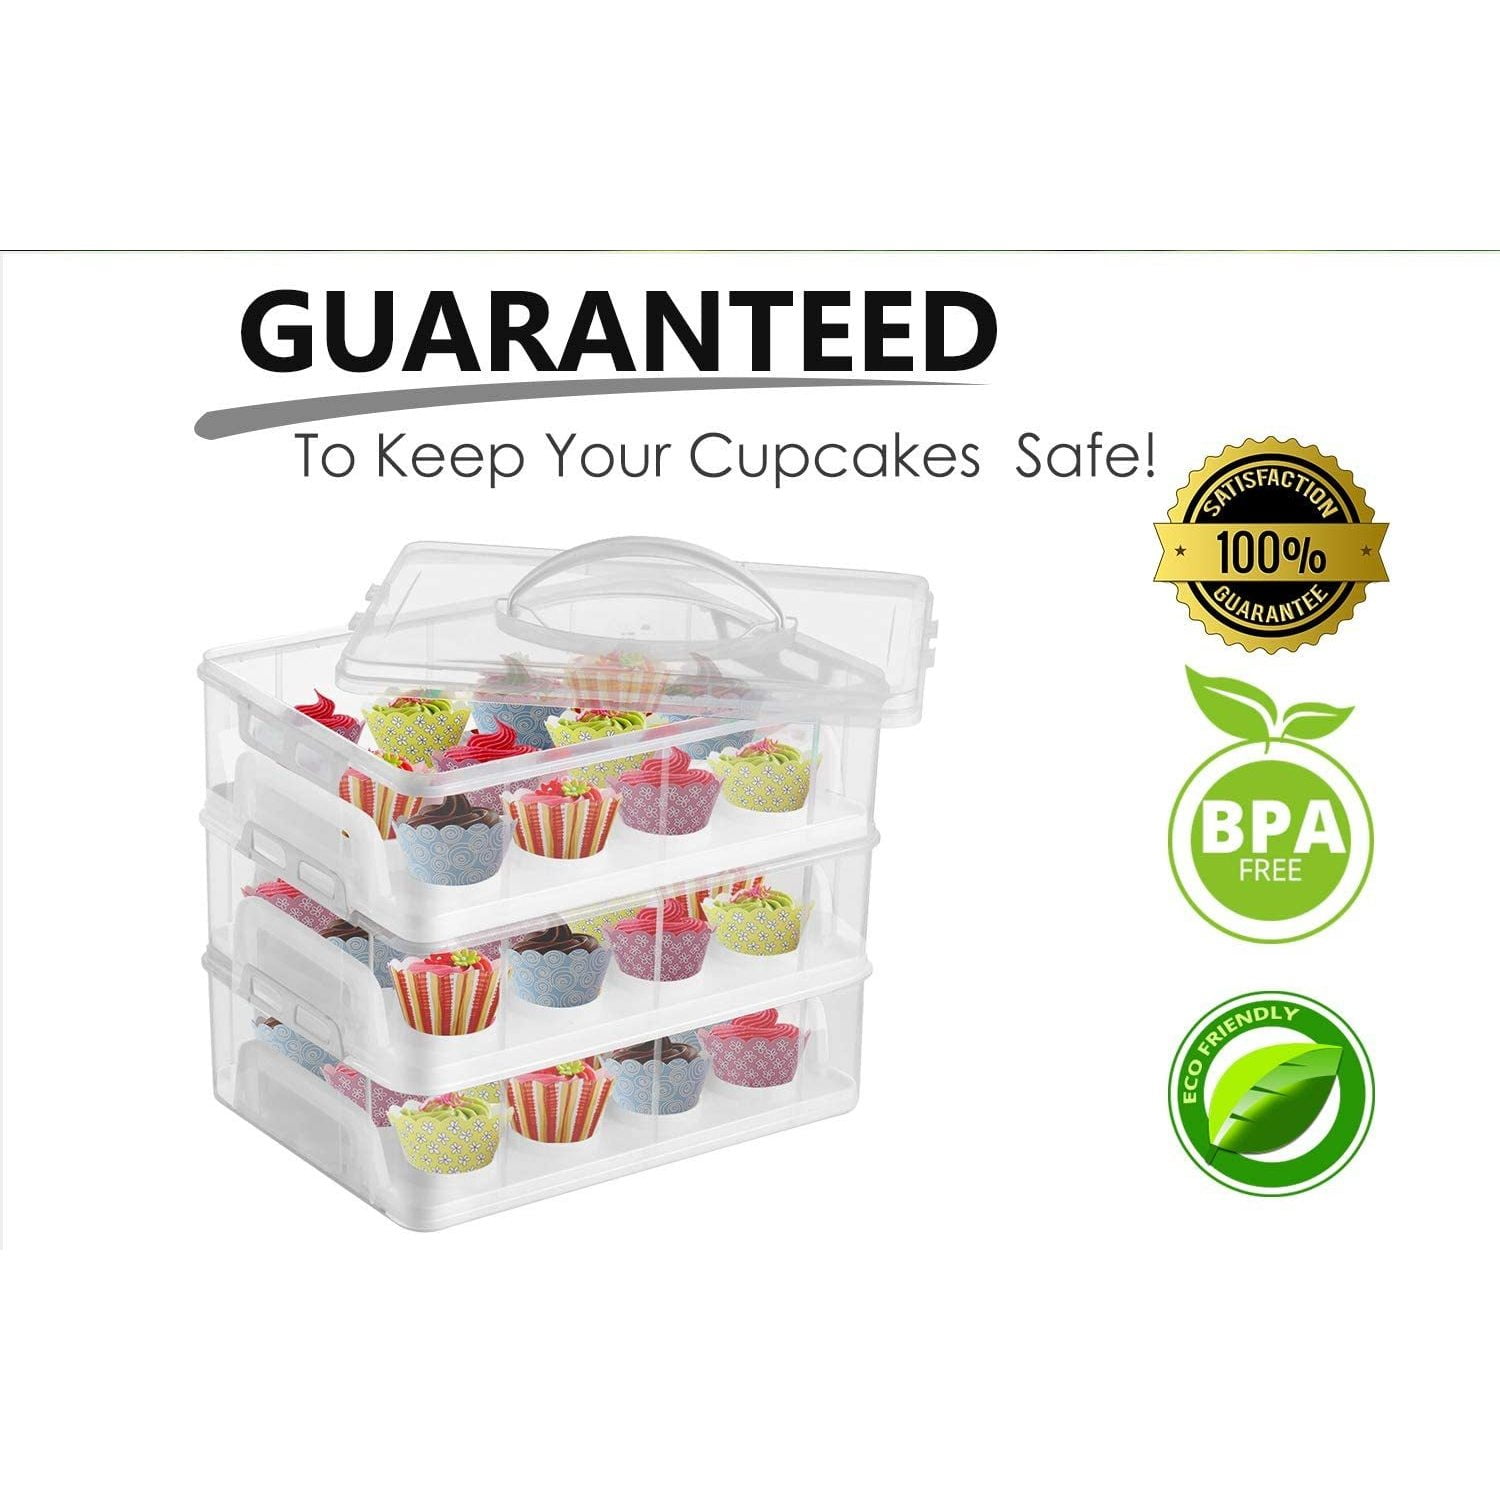 Blue Cupcake Storage Carrier 3-Tier Holds 36 Cupcakes Or 3 Sheet Cakes -  household items - by owner - housewares sale